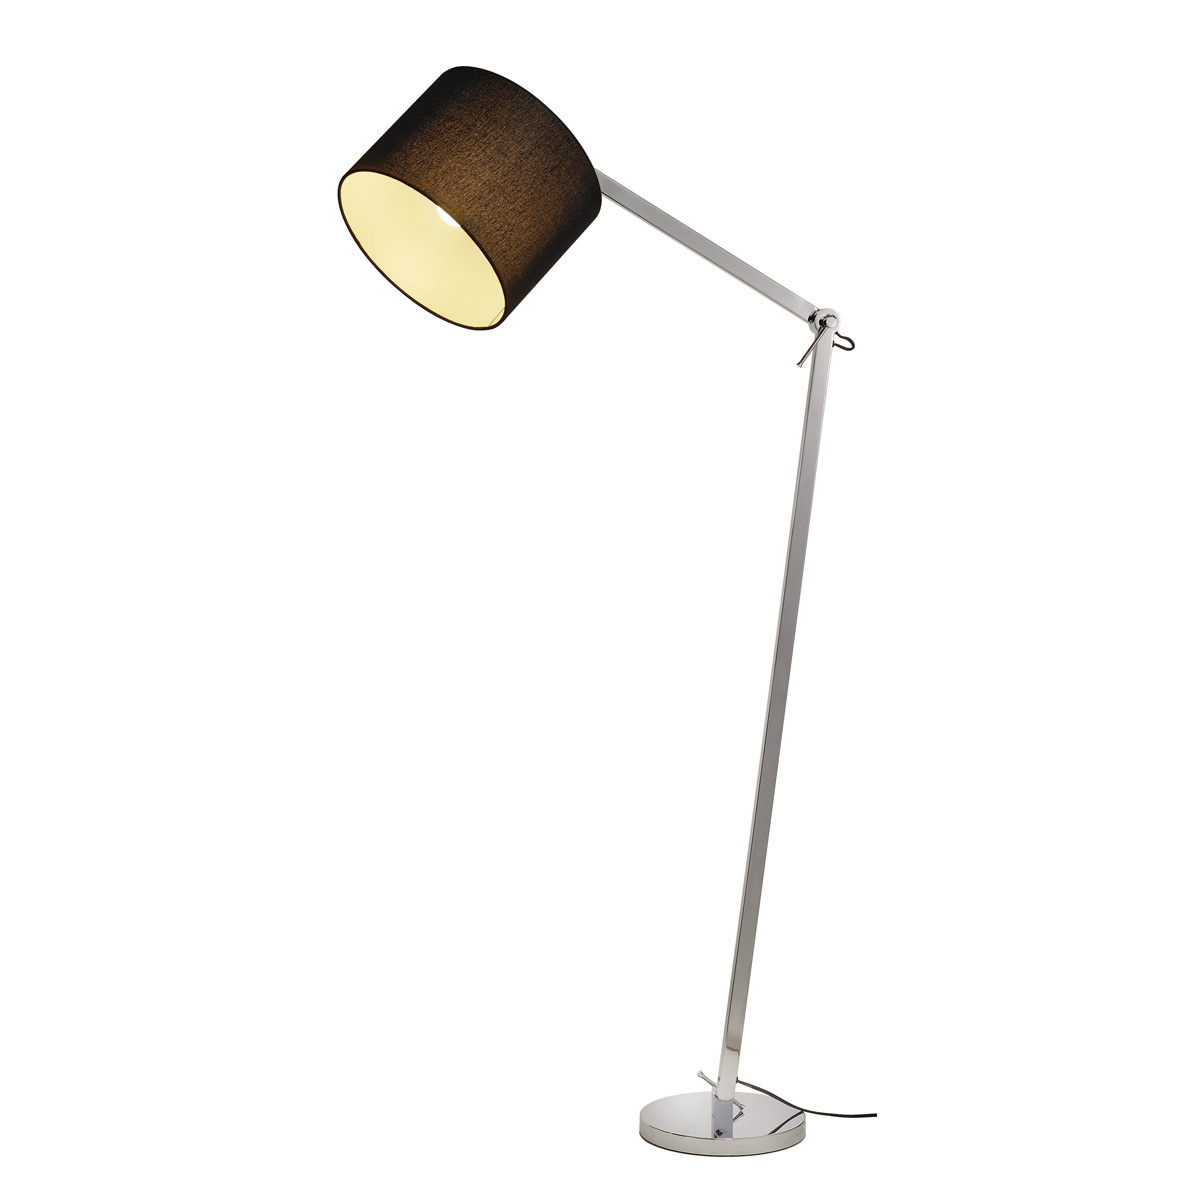 Details About Intalite Tenora Floor Lamp Stand Fl 1 Black E27 60w Max 2 Packages for sizing 1200 X 1200